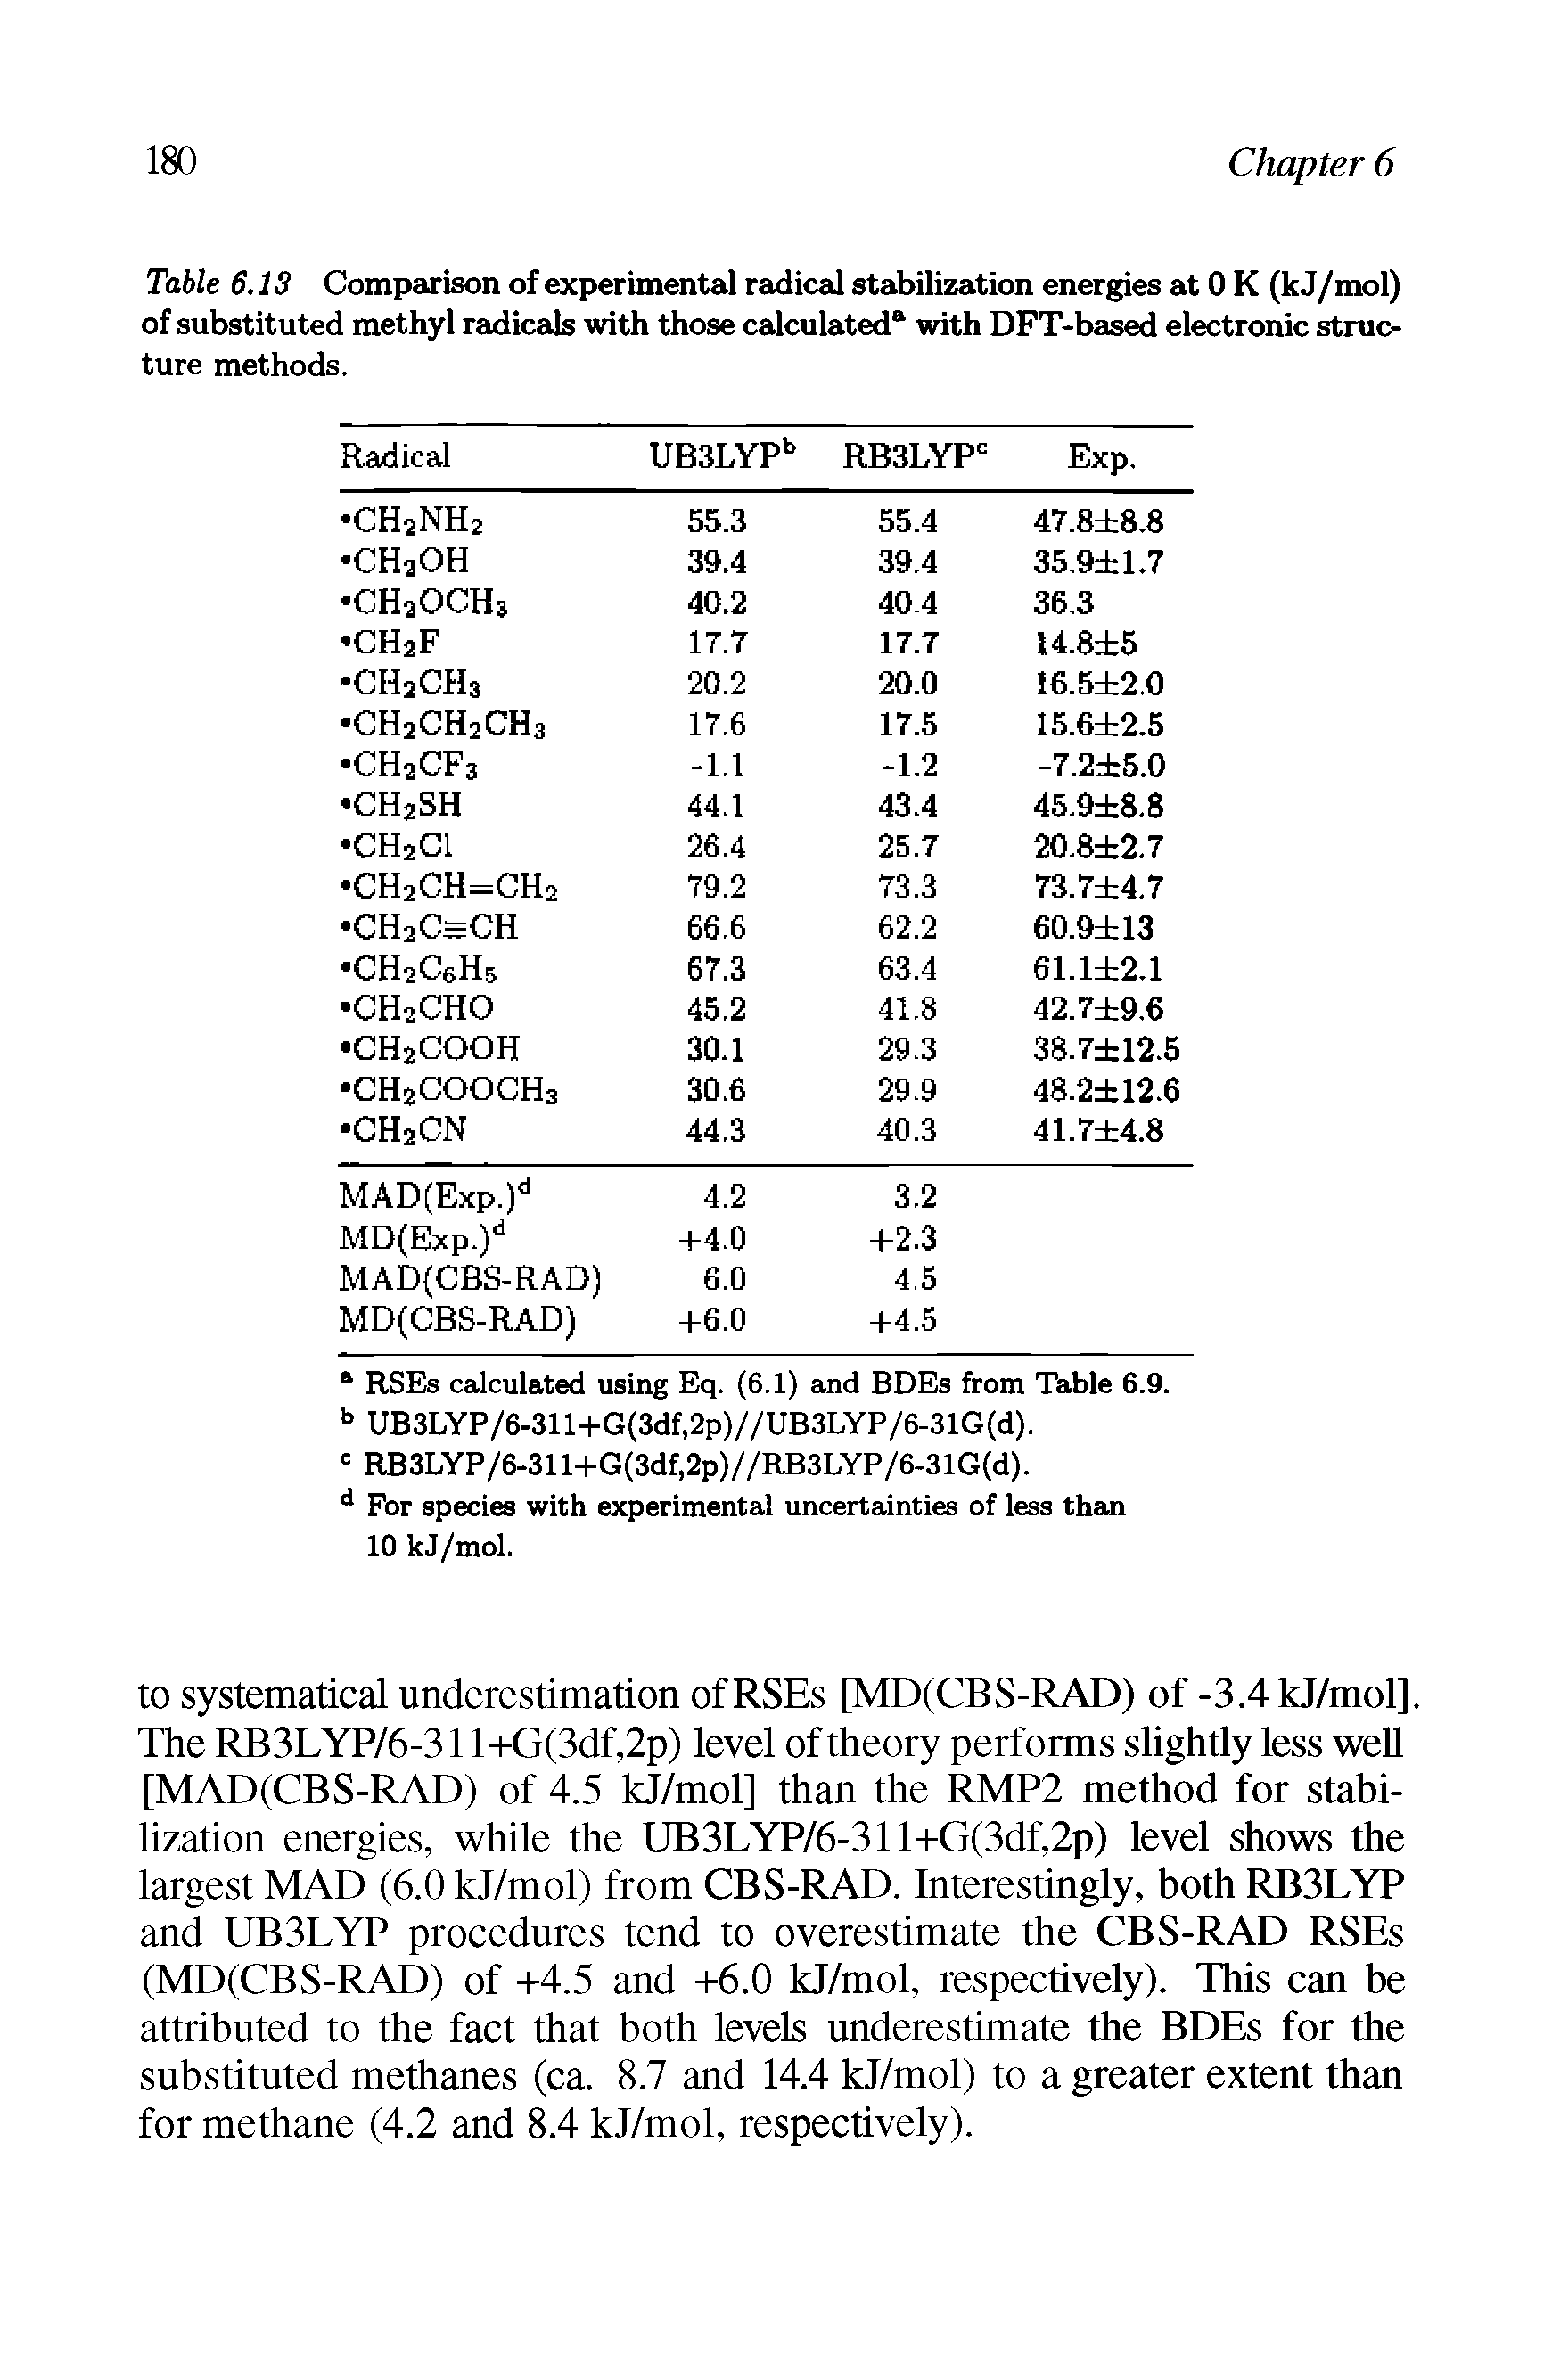 Table 6.13 Comparison of experimental radical stabilization energies at 0 K (k J/mol) of substituted methyl radicals with those calculated with DFT-based electronic structure methods.